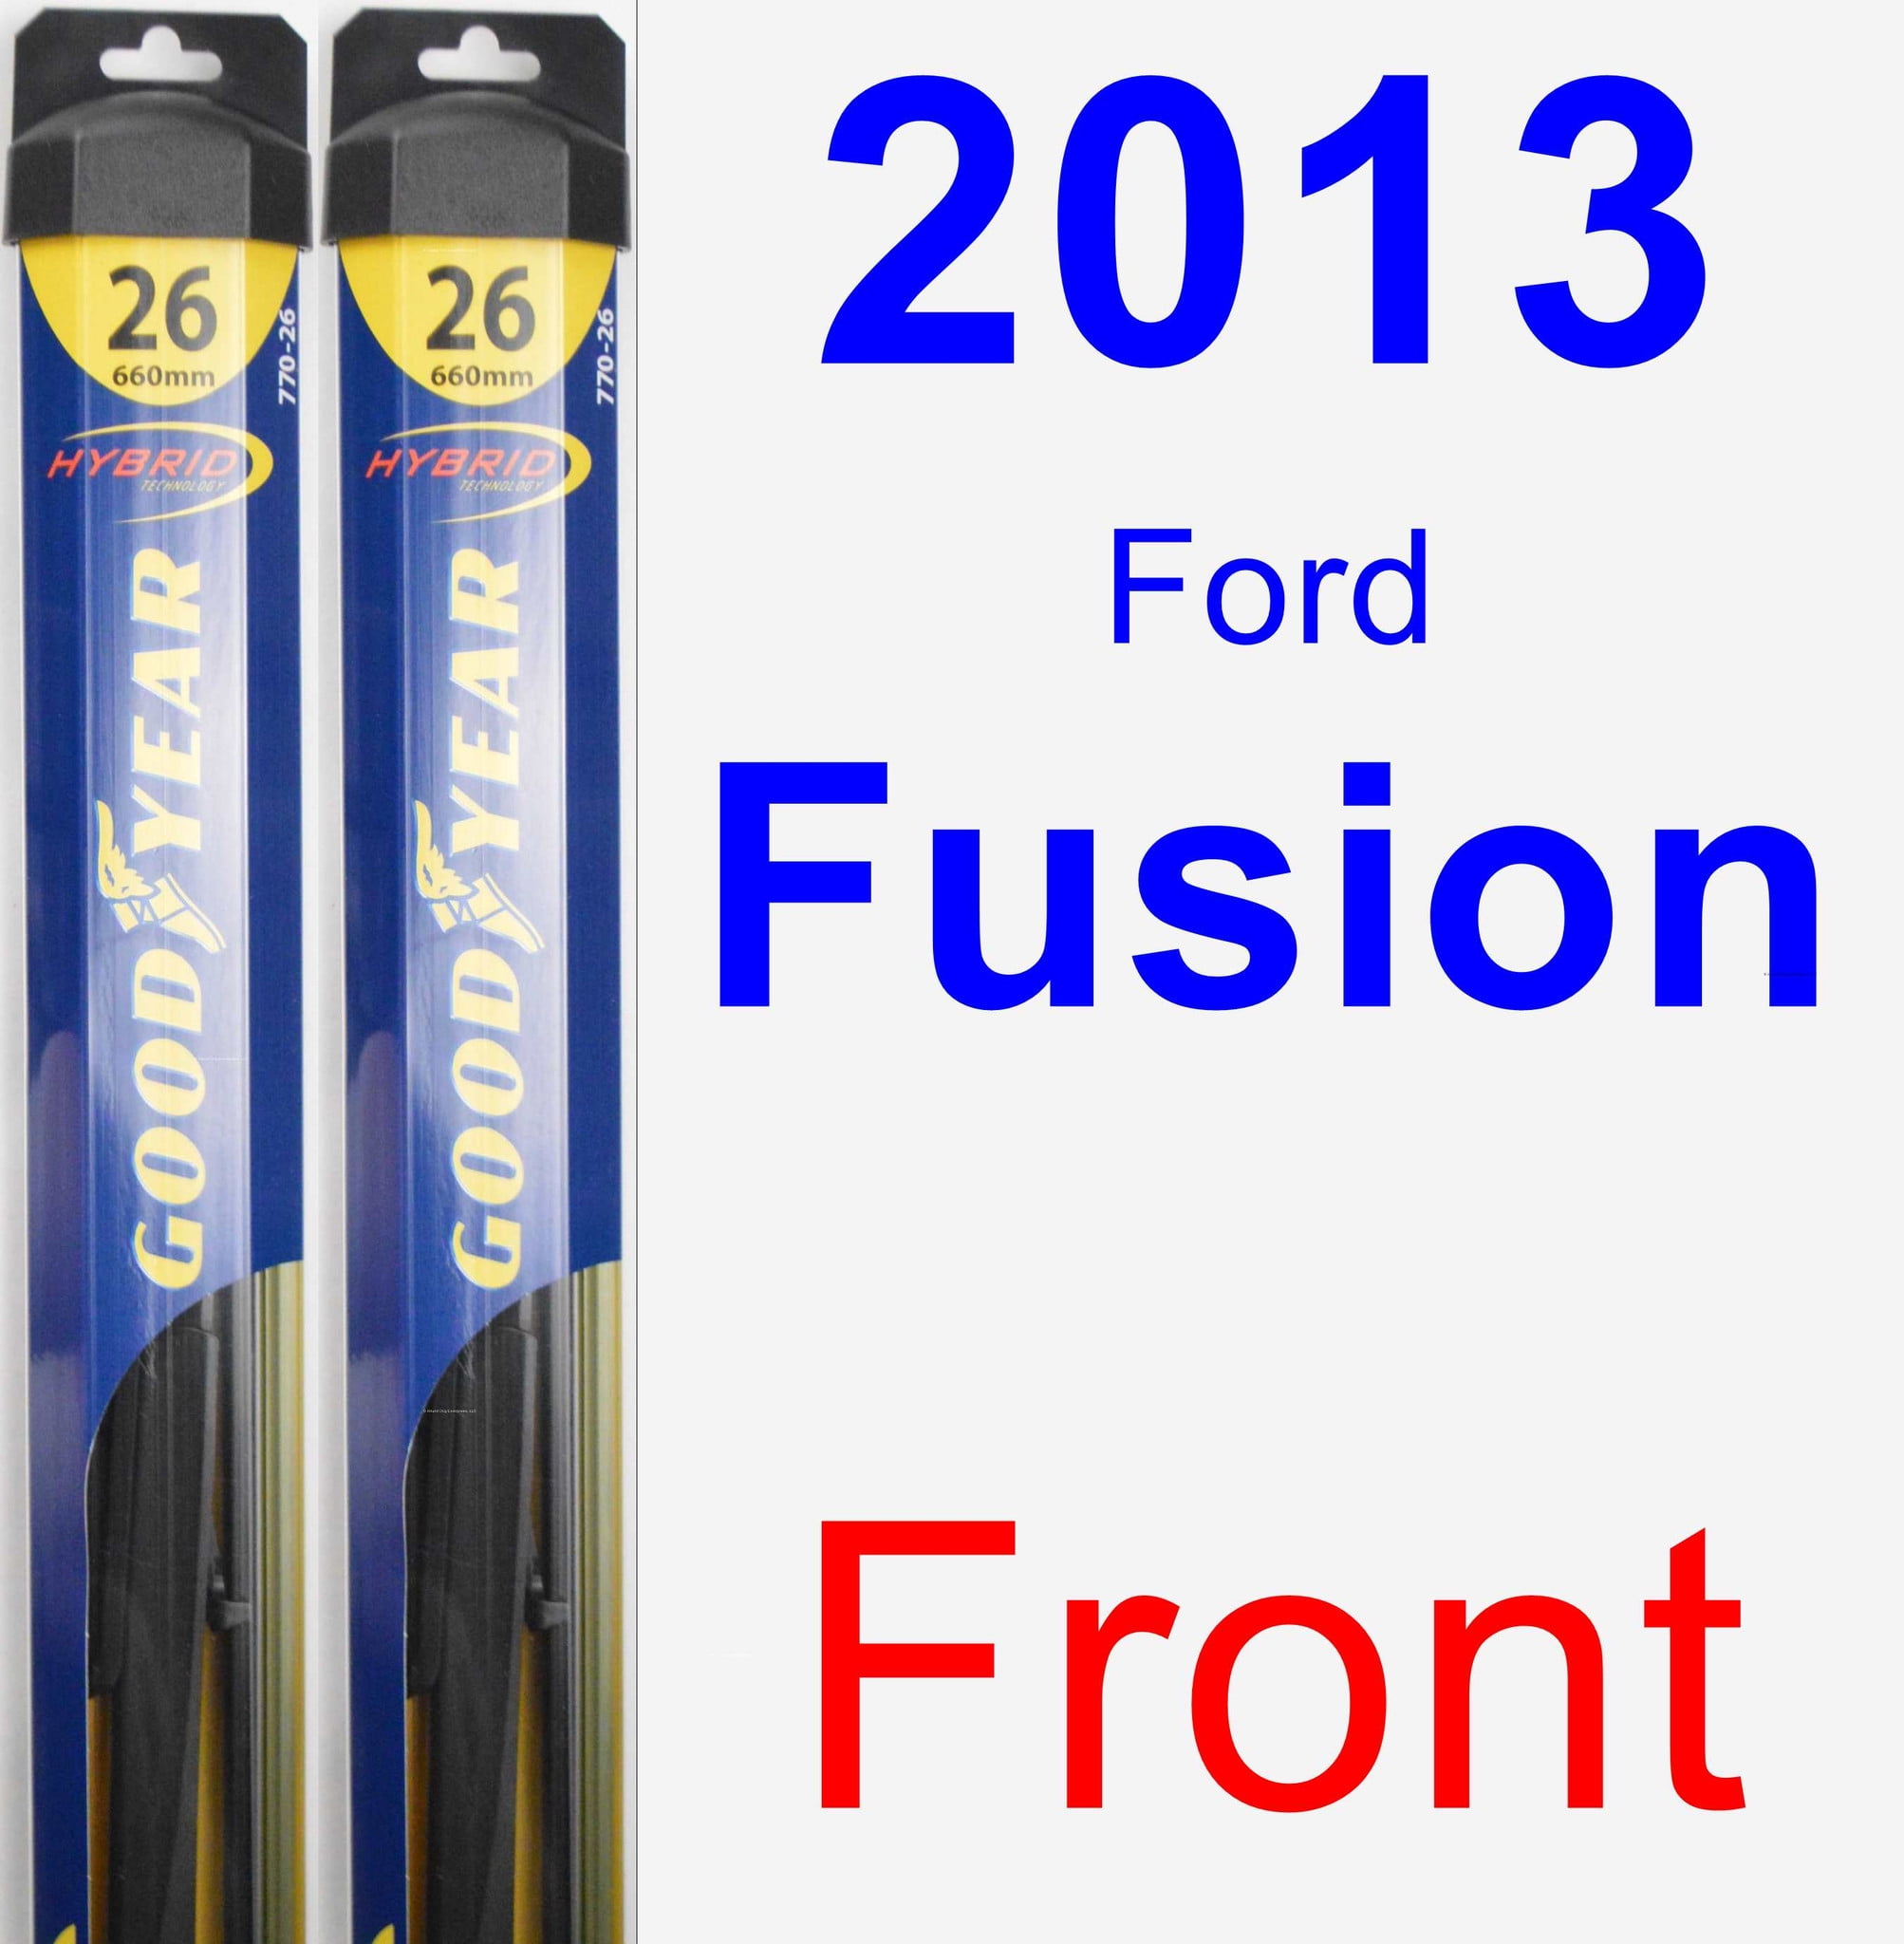 2013 Ford Fusion Wiper Blade Set/Kit (Front) (2 Blades) - Hybrid - Walmart.com - Walmart.com 2014 Ford Fusion Se Wiper Blade Size